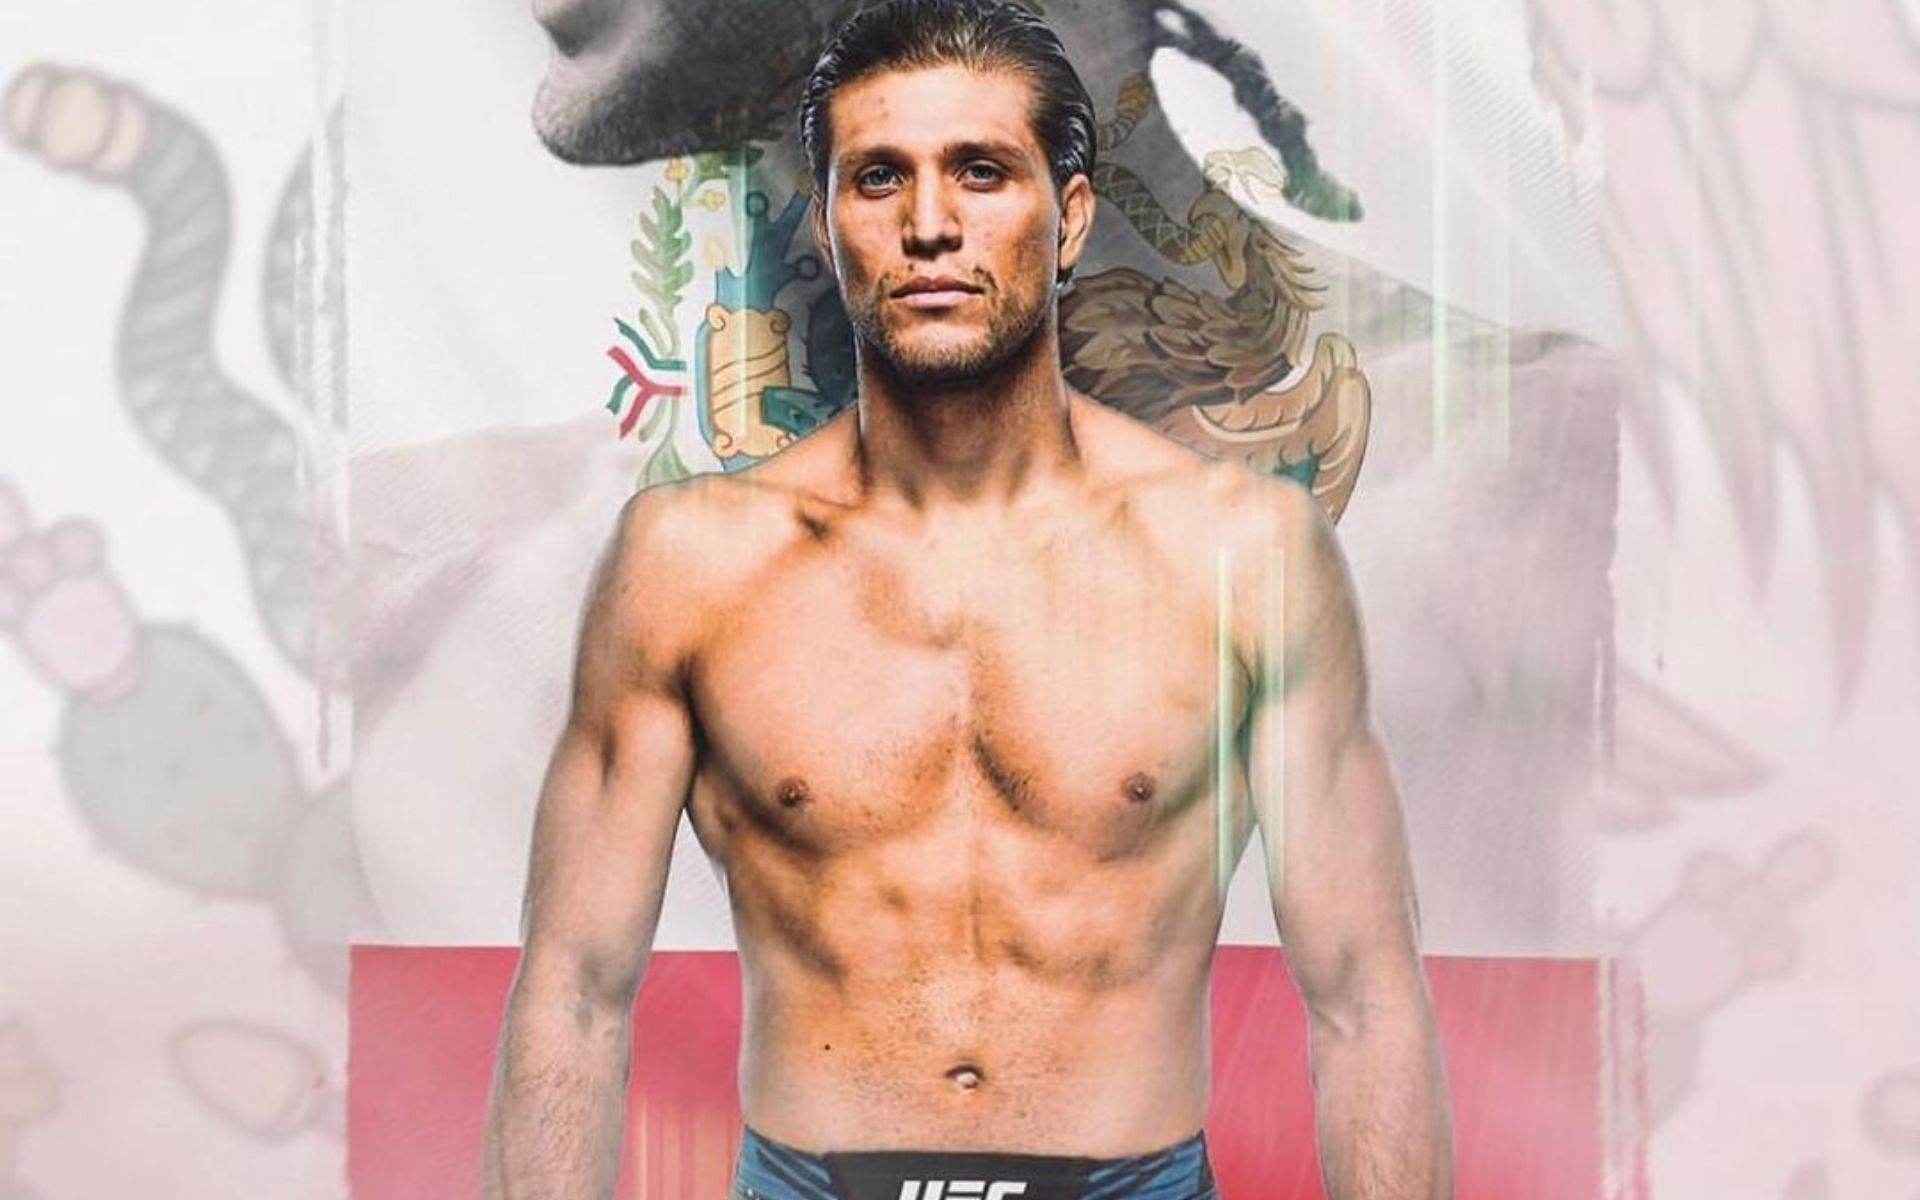 Brian Ortega deliverers a submission finish at UFC Mexico [Image courtesy @briantcity on Instagram]